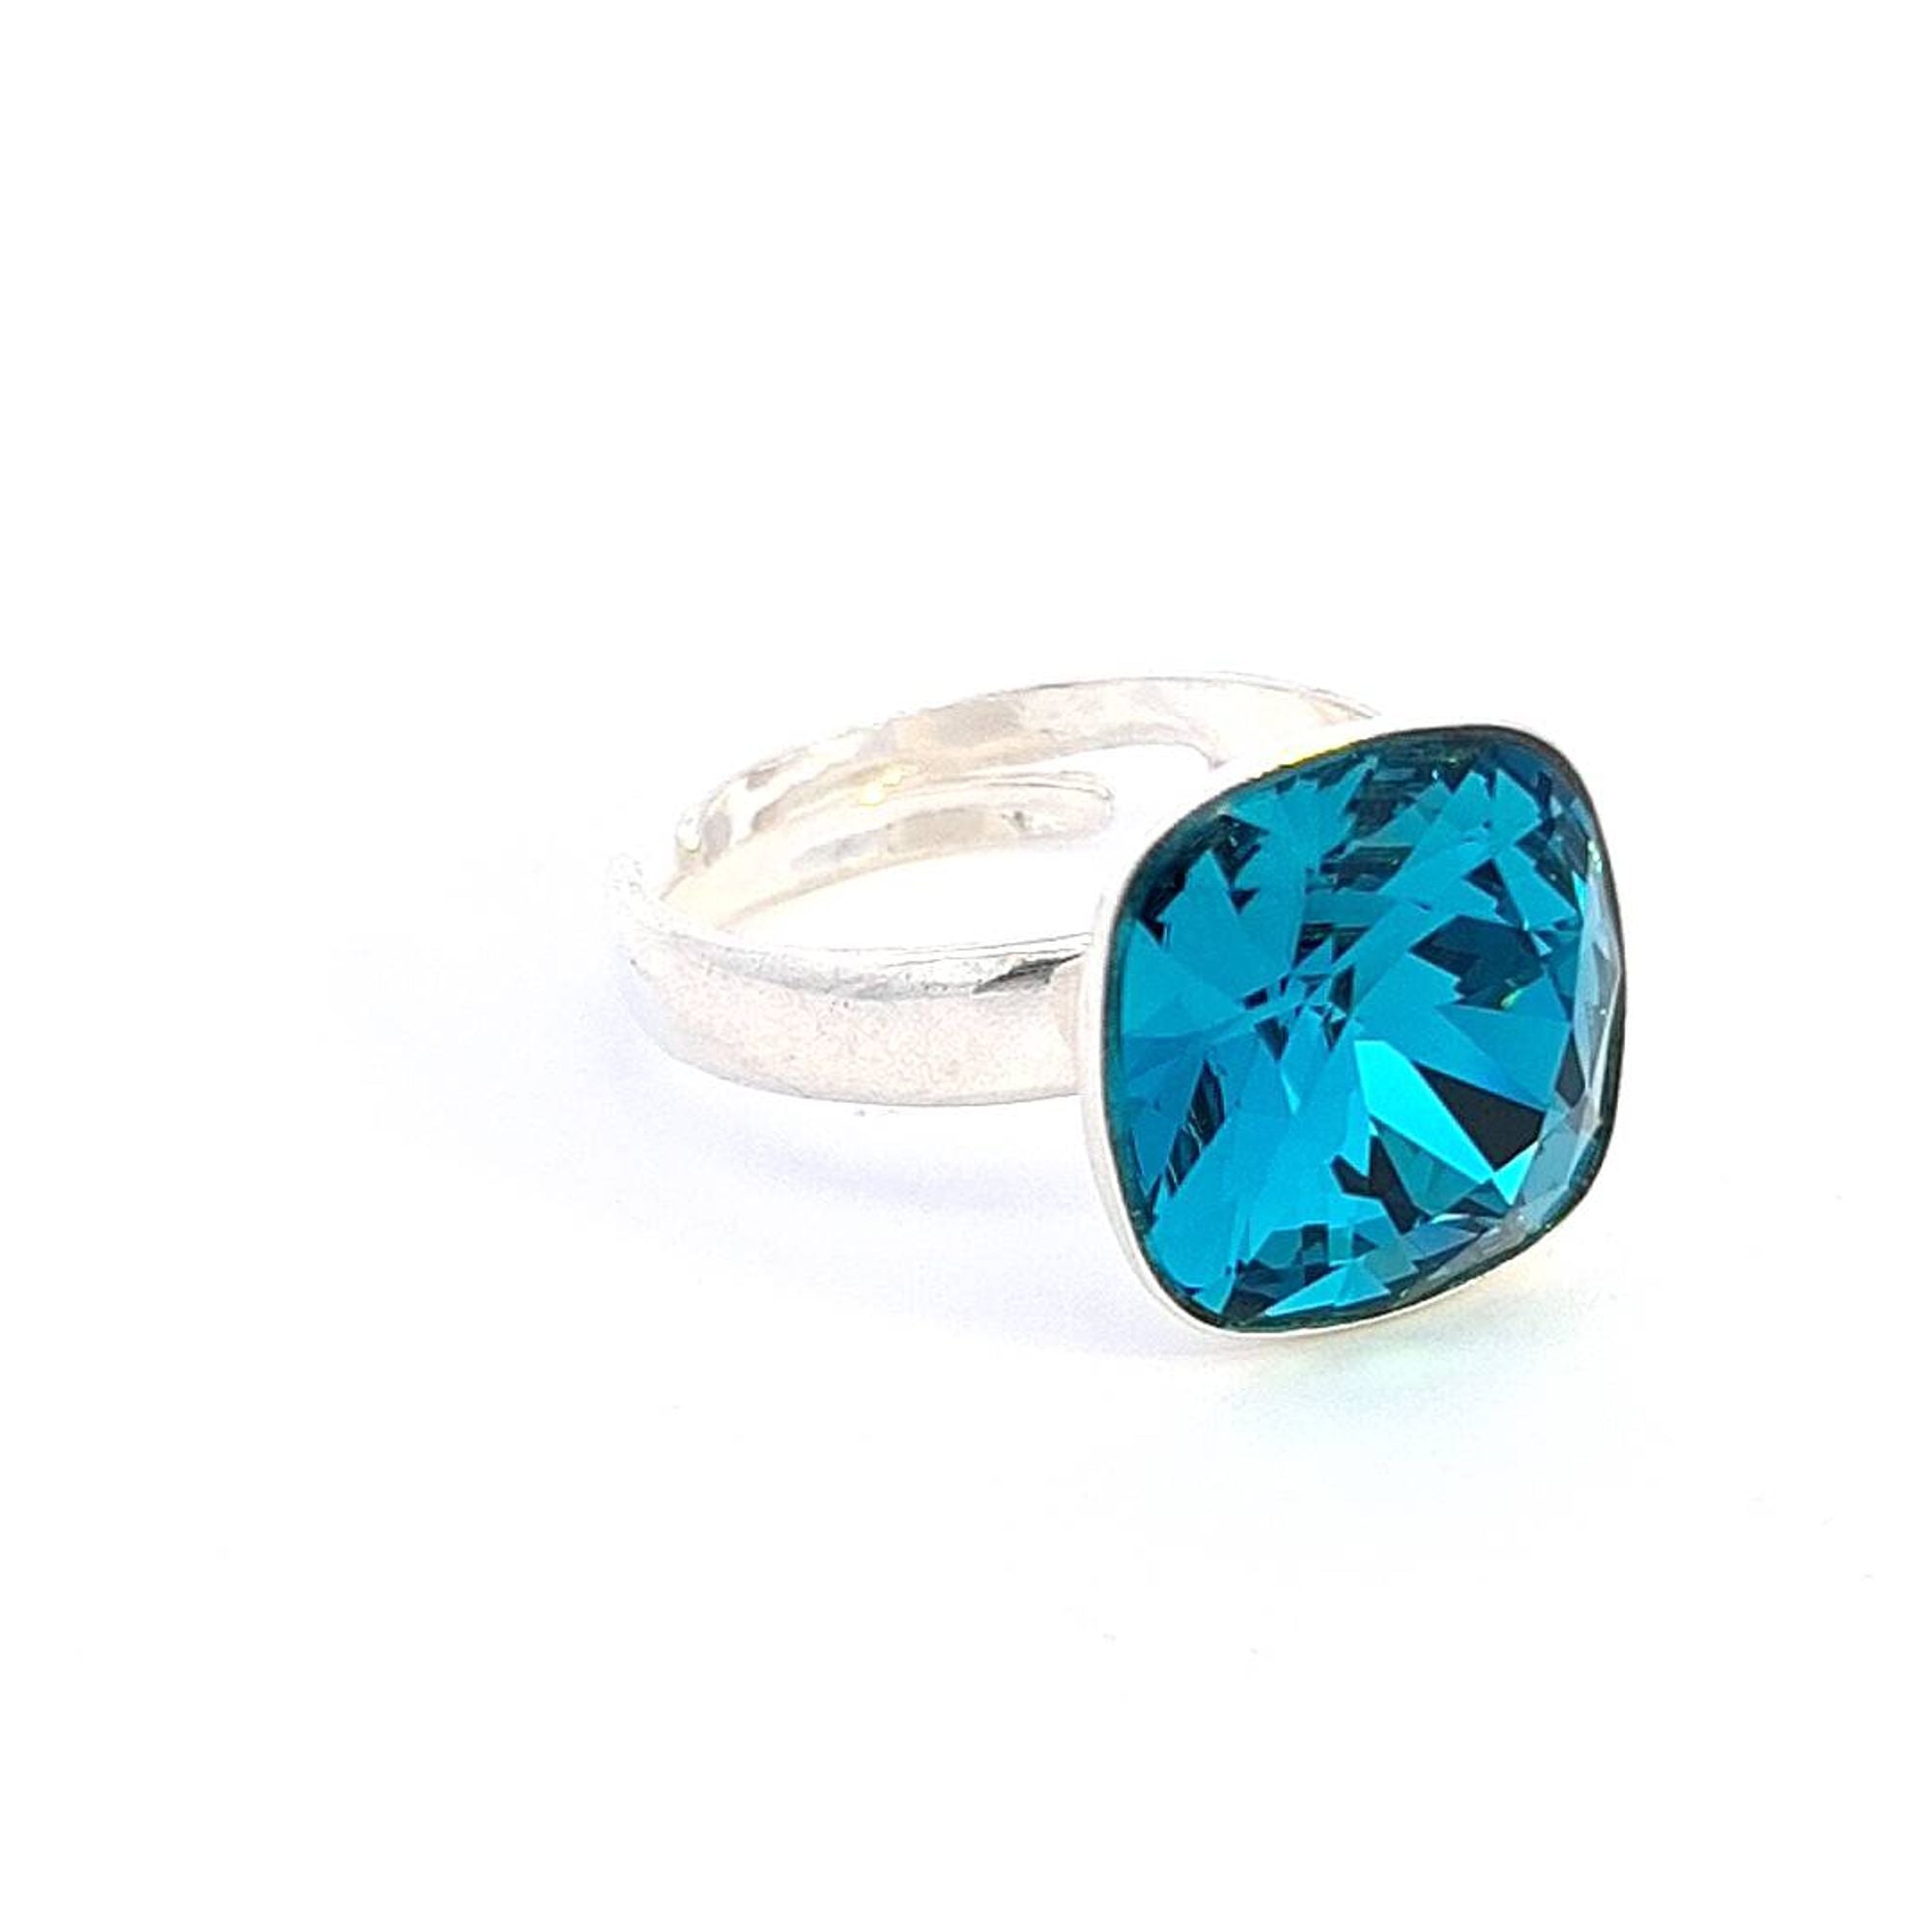 Adjustable Magpie Gems Luminara Cushion Ring Featuring a Serene Indicolite Turquoise Crystal